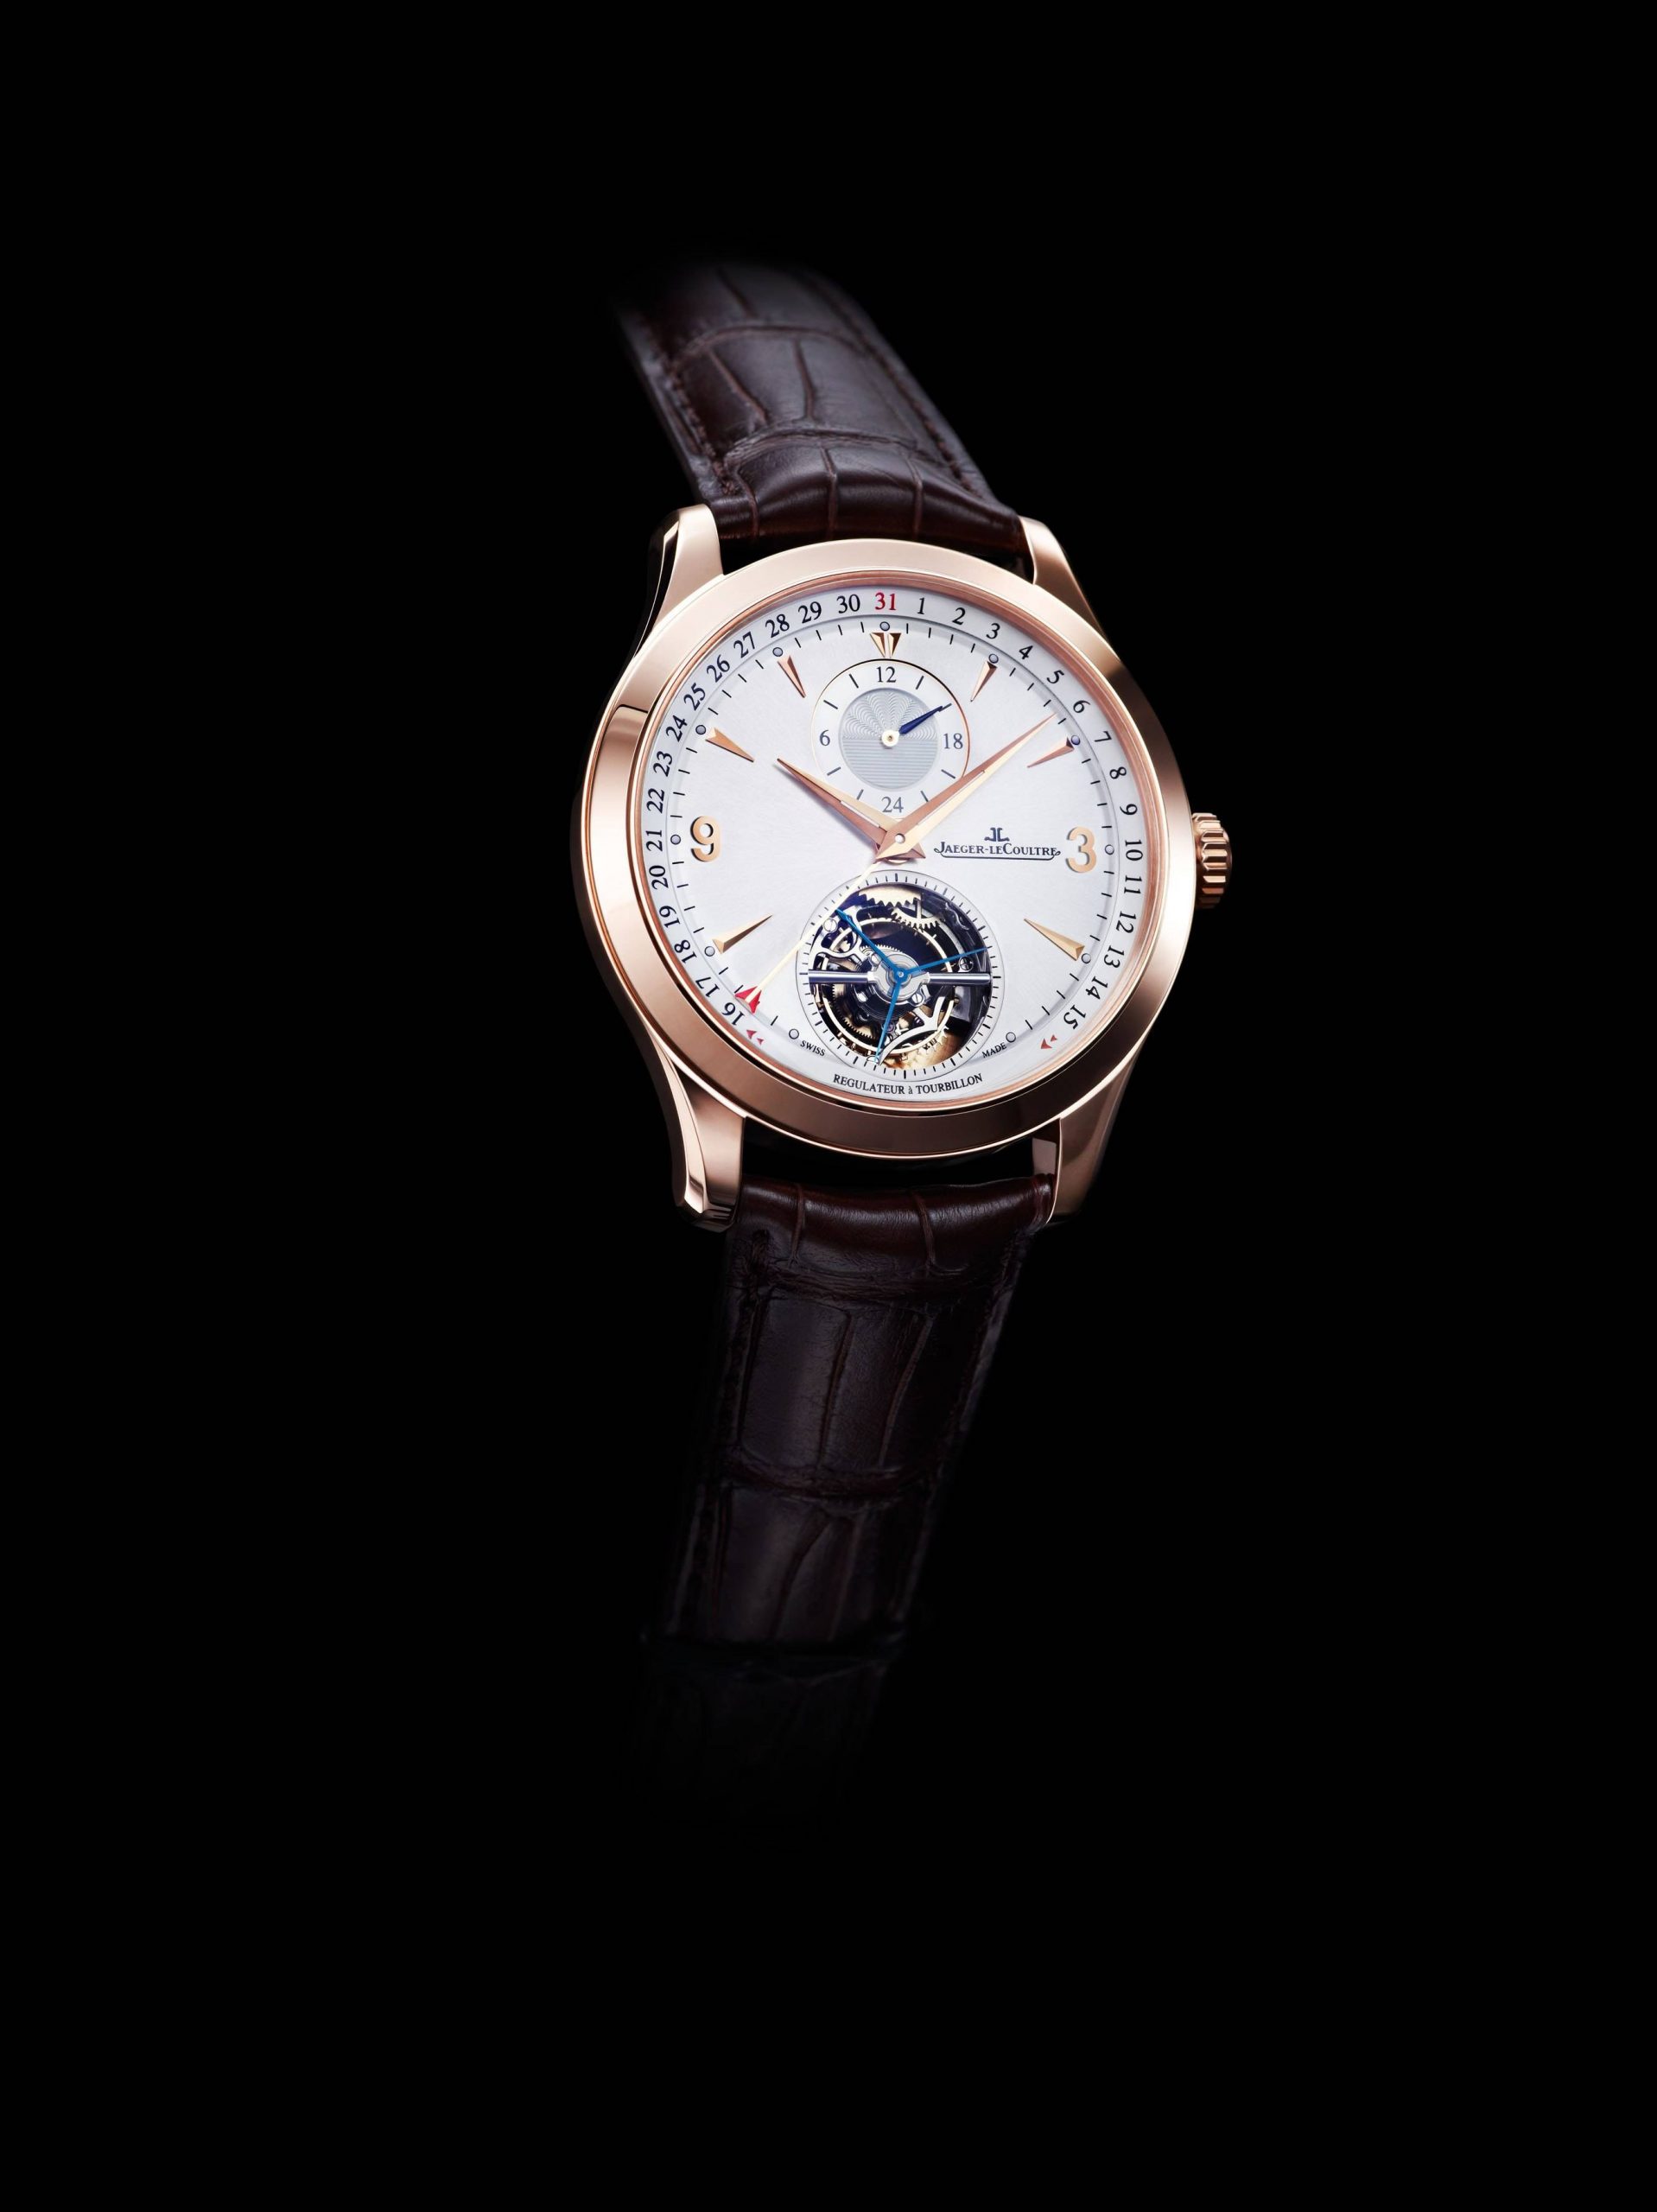 Best Banker Watches of 2013